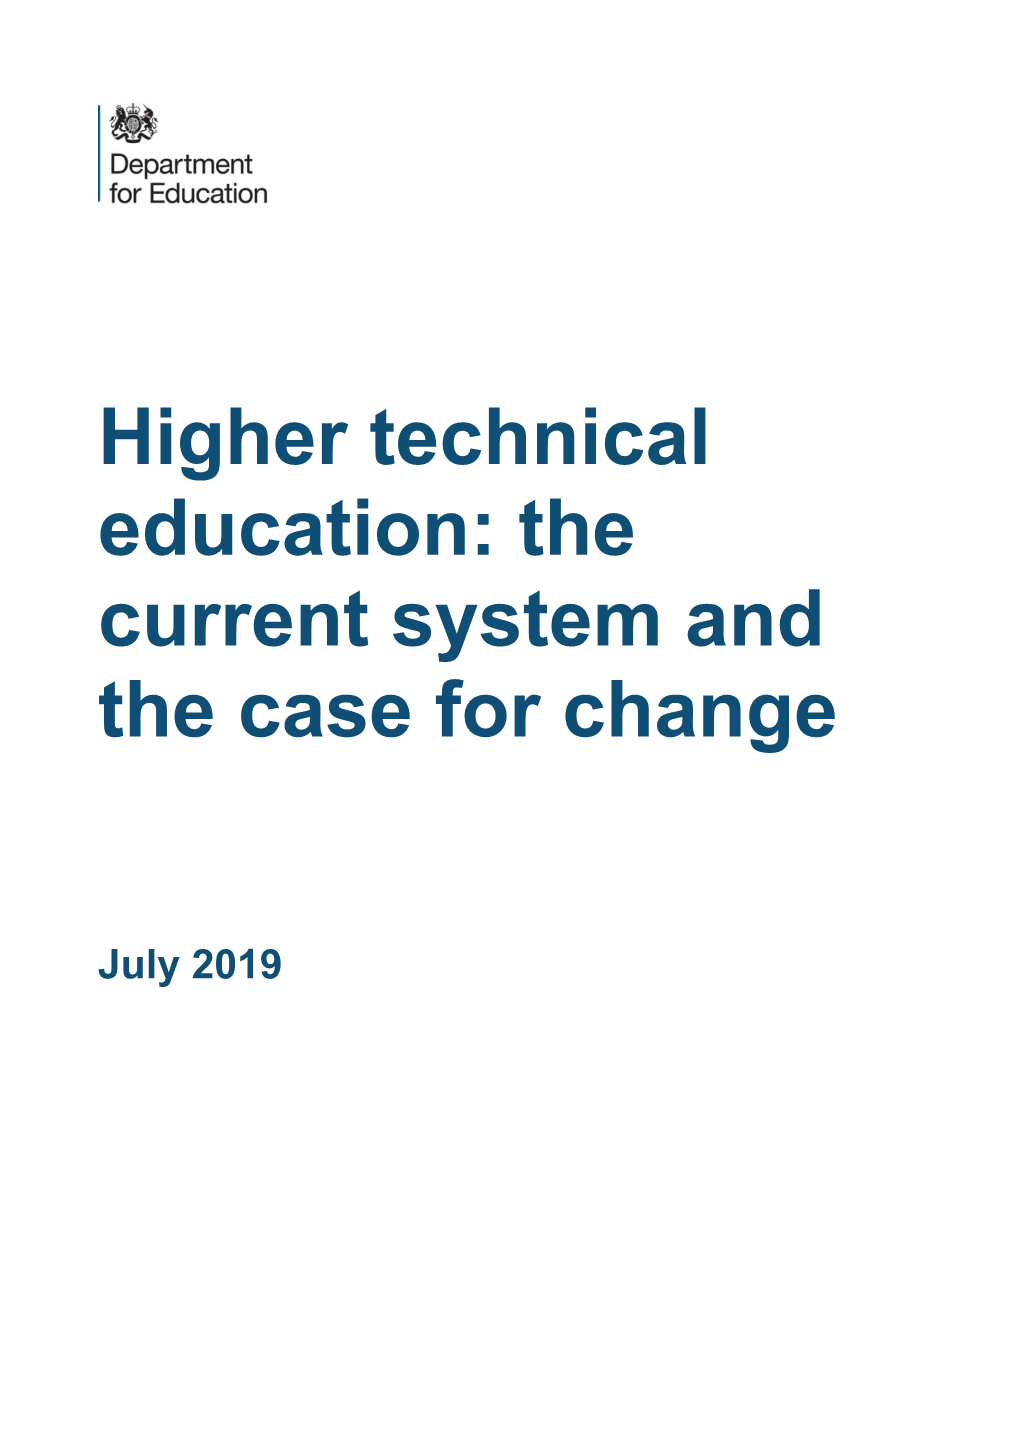 Higher Technical Education: the Current System and the Case for Change